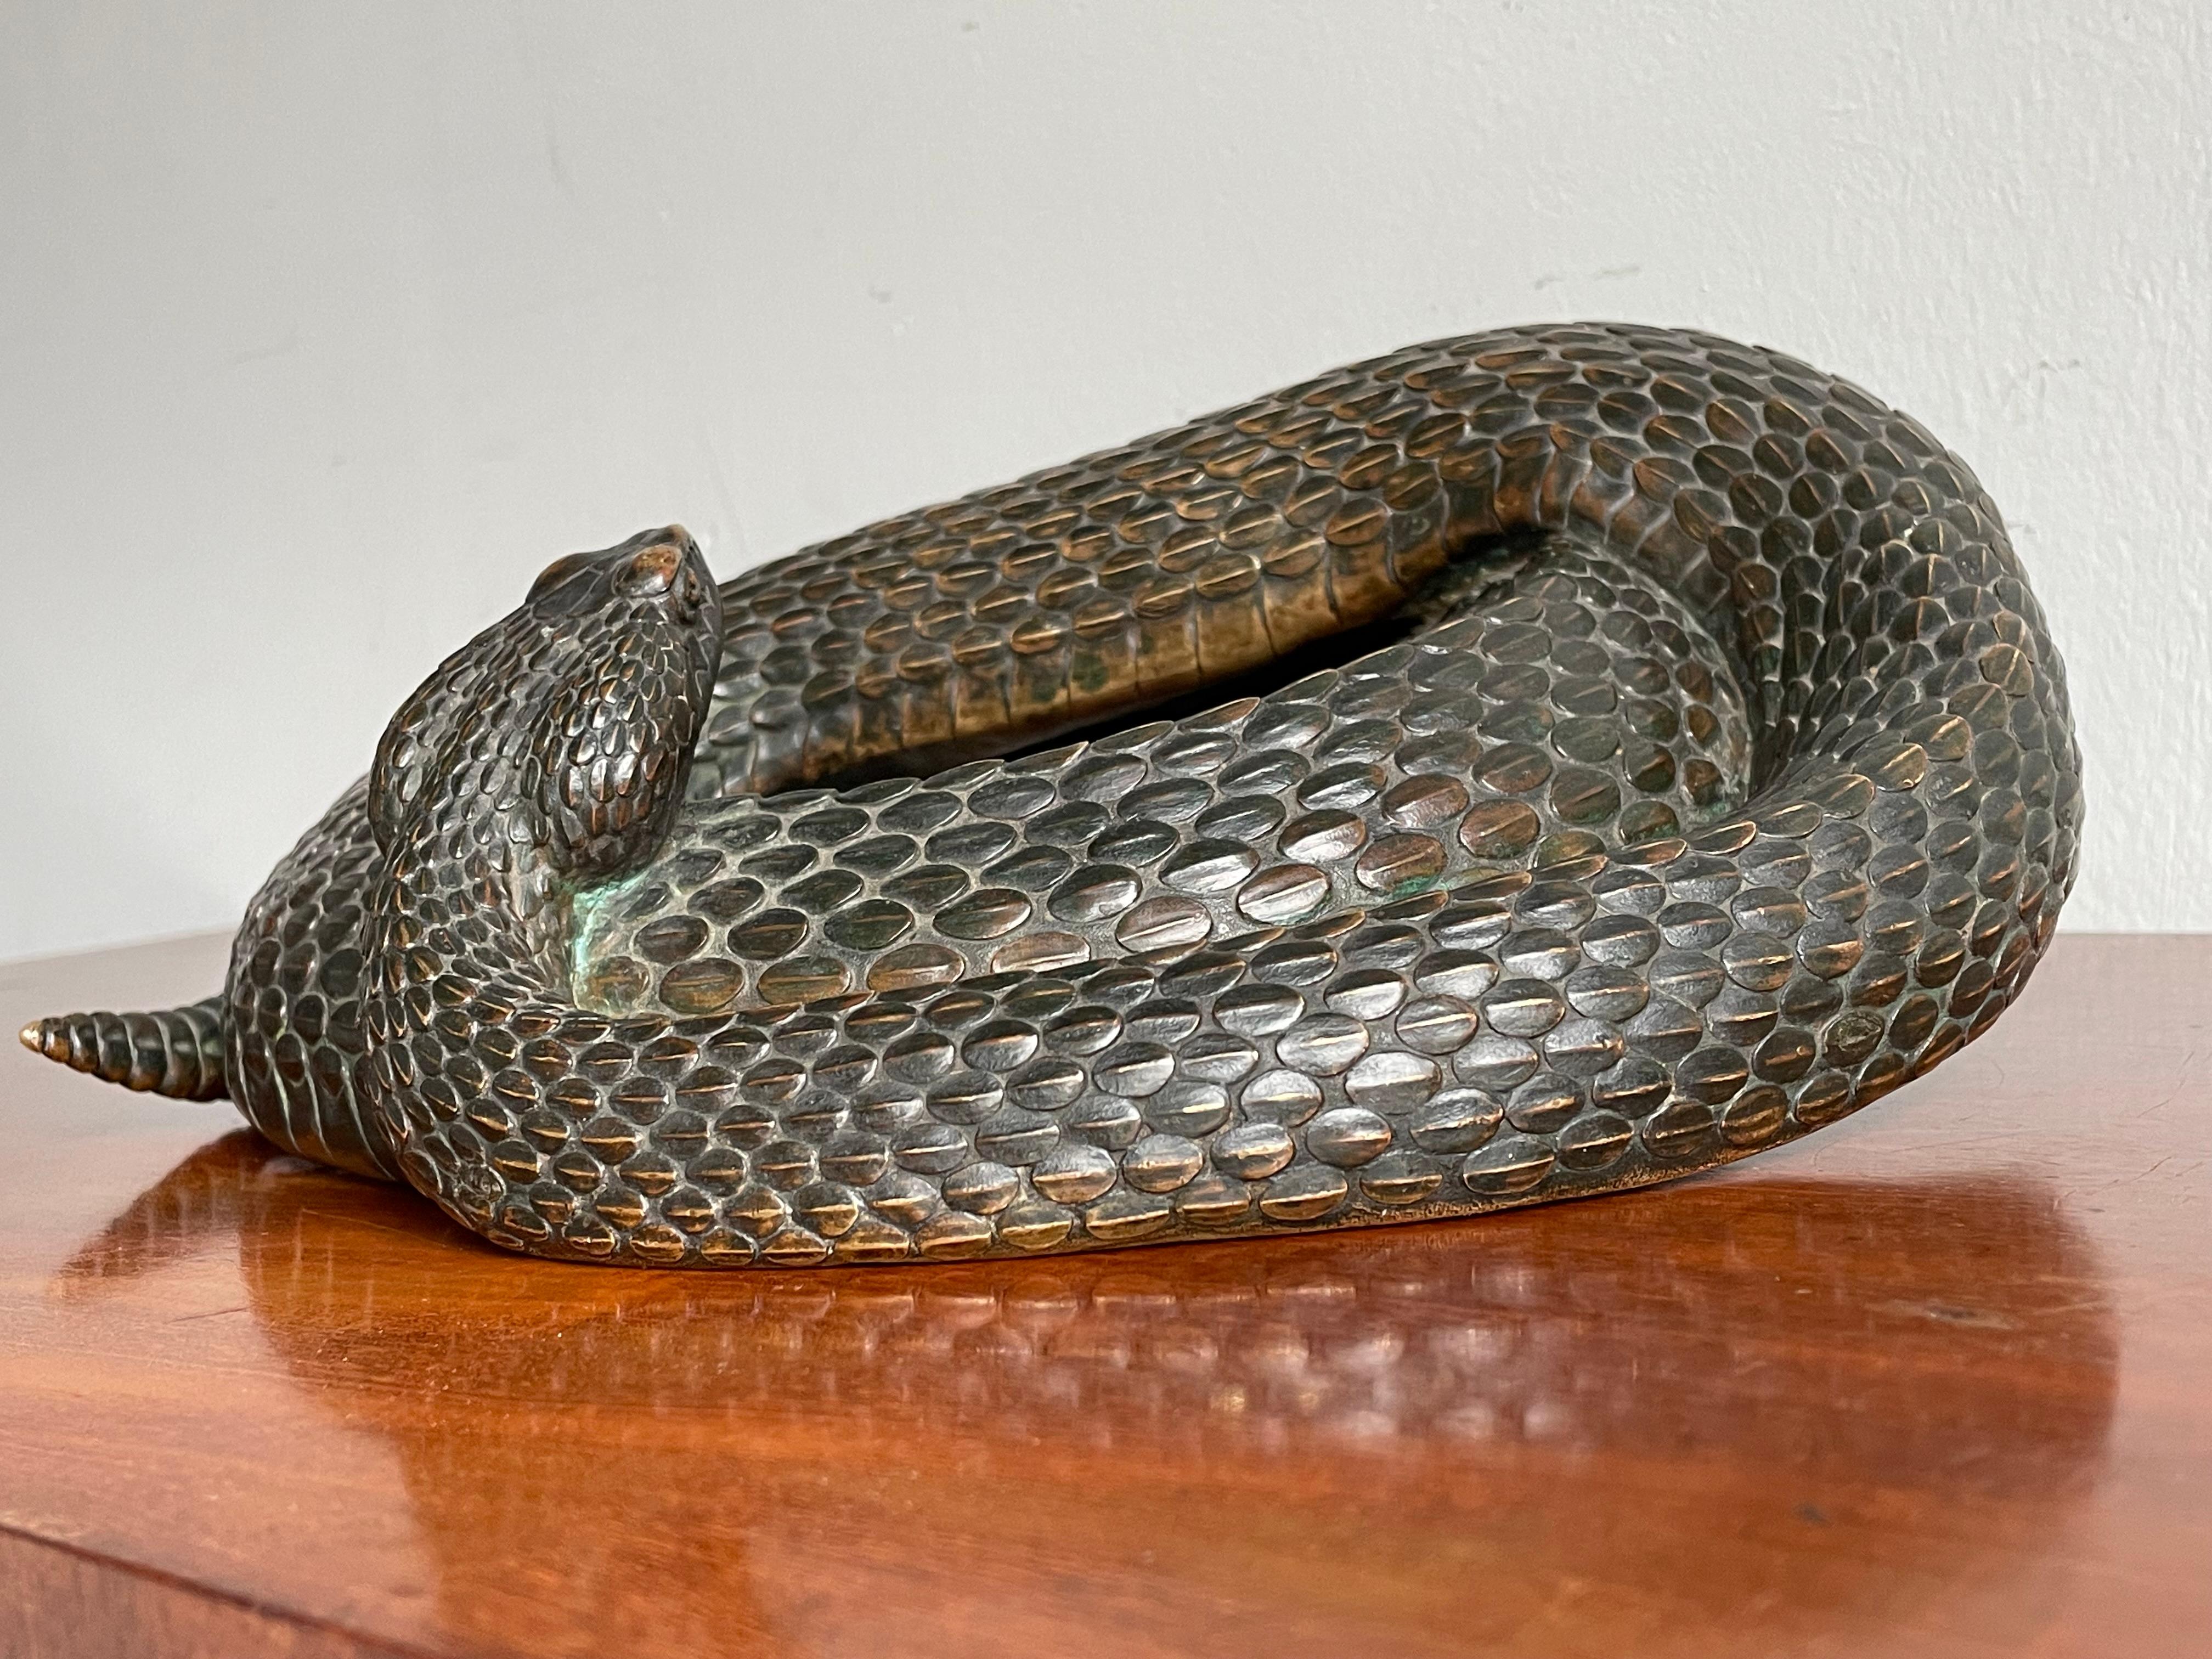 19th Century Museum Worthy Antique Bronze Coiled Rattlesnake Sculpture Signed & Marked 1885  For Sale